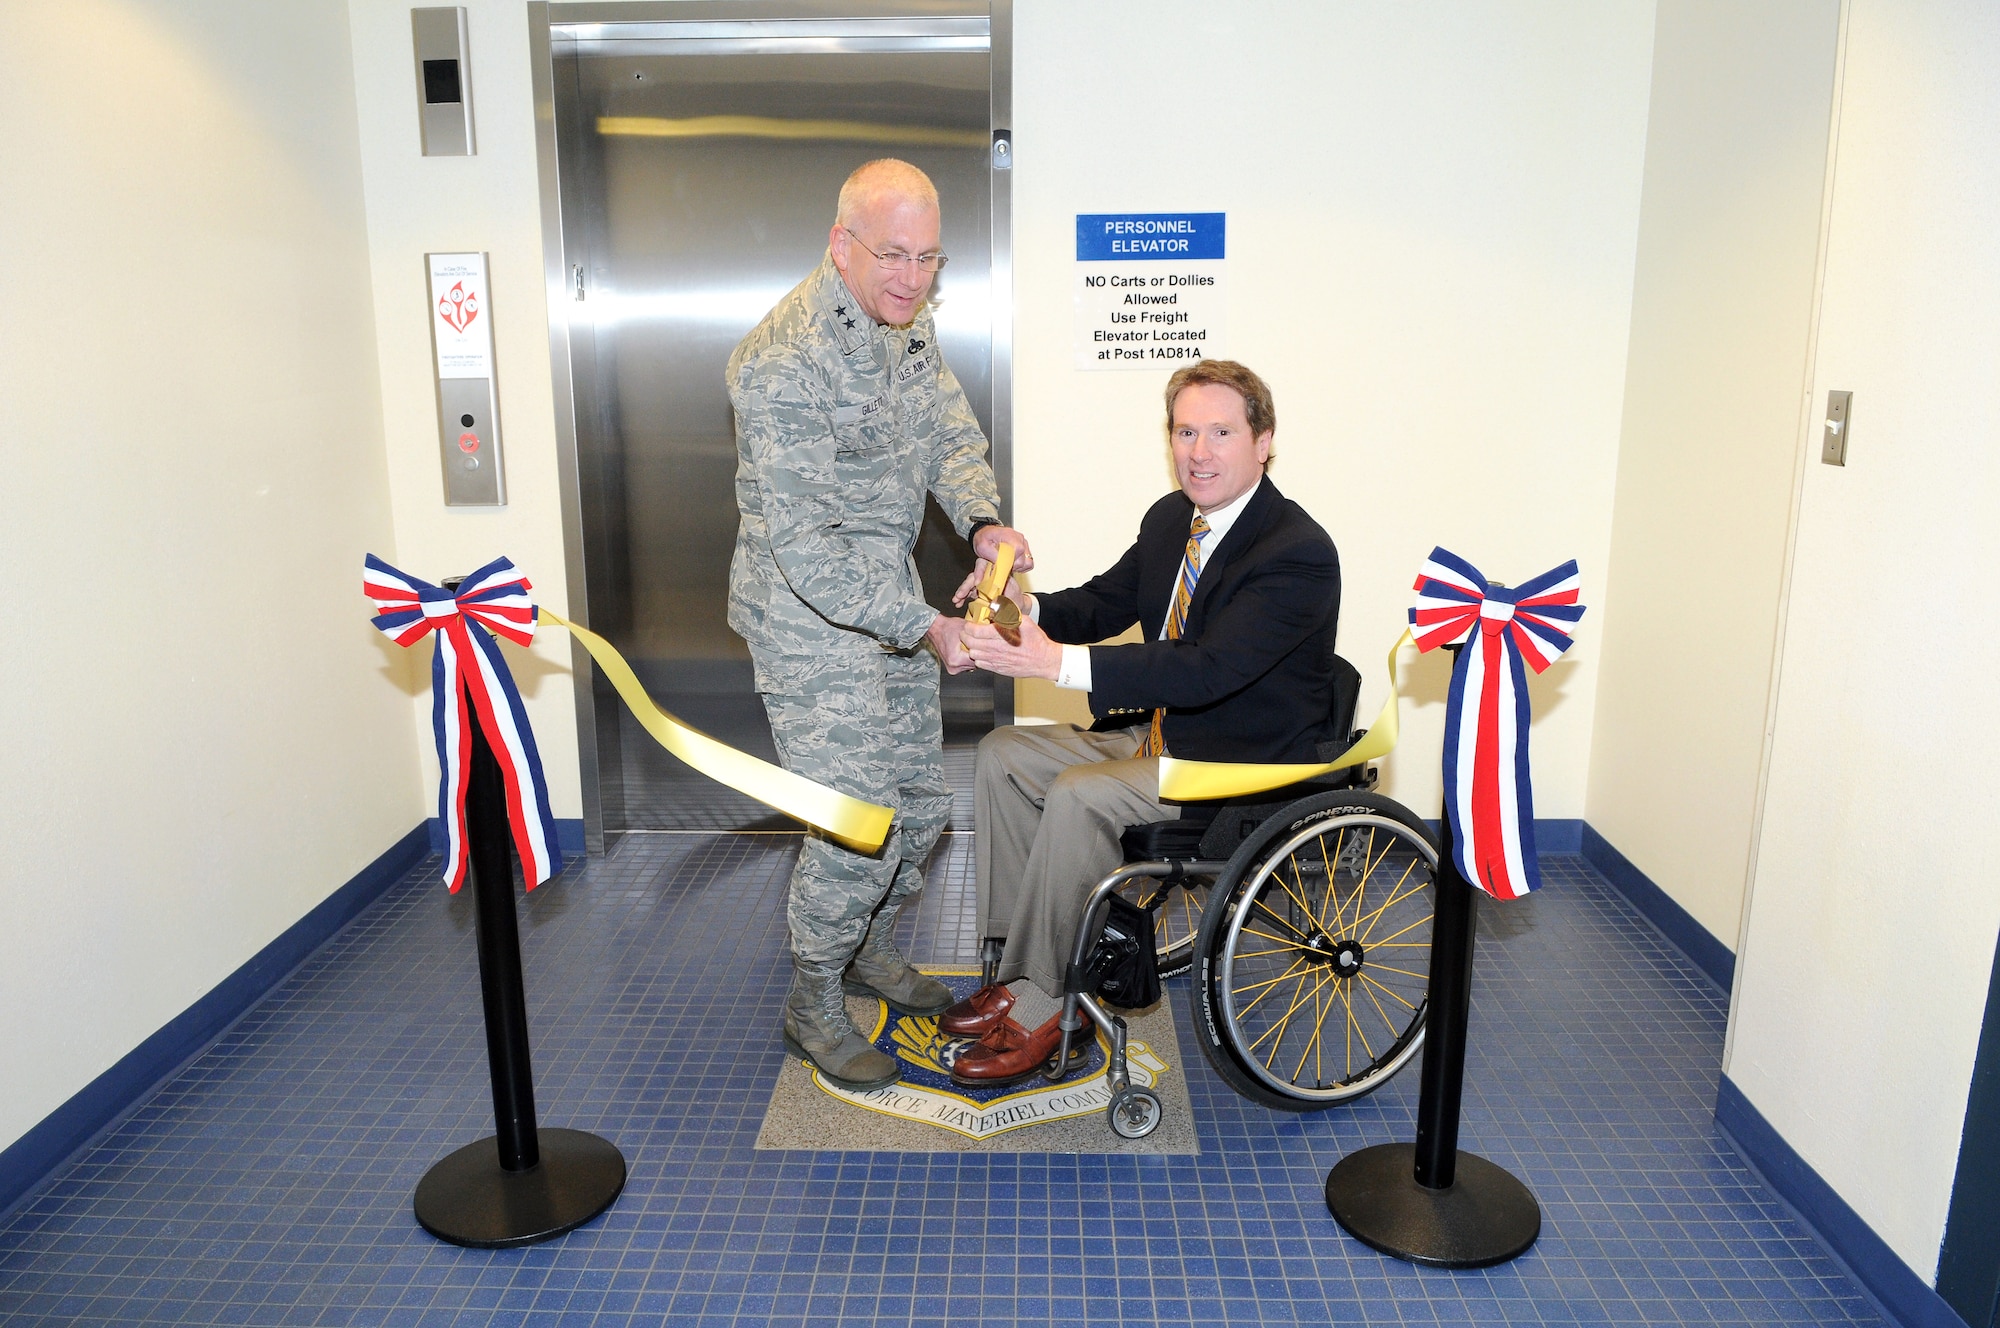 A ribbon cutting ceremony was held recently to officially open a new Americans With Disabilities Act-compliant elevator in Bldg. 3001. Performing the honors were Maj. Gen. David Gillett, Oklahoma City Air Logistics Center commander, and Steve Scalzo, 76th Maintenance Wing Business Operations Office director and co-chairman of Air Force Materiel Command People with Disabilities program. (Air Force photo)